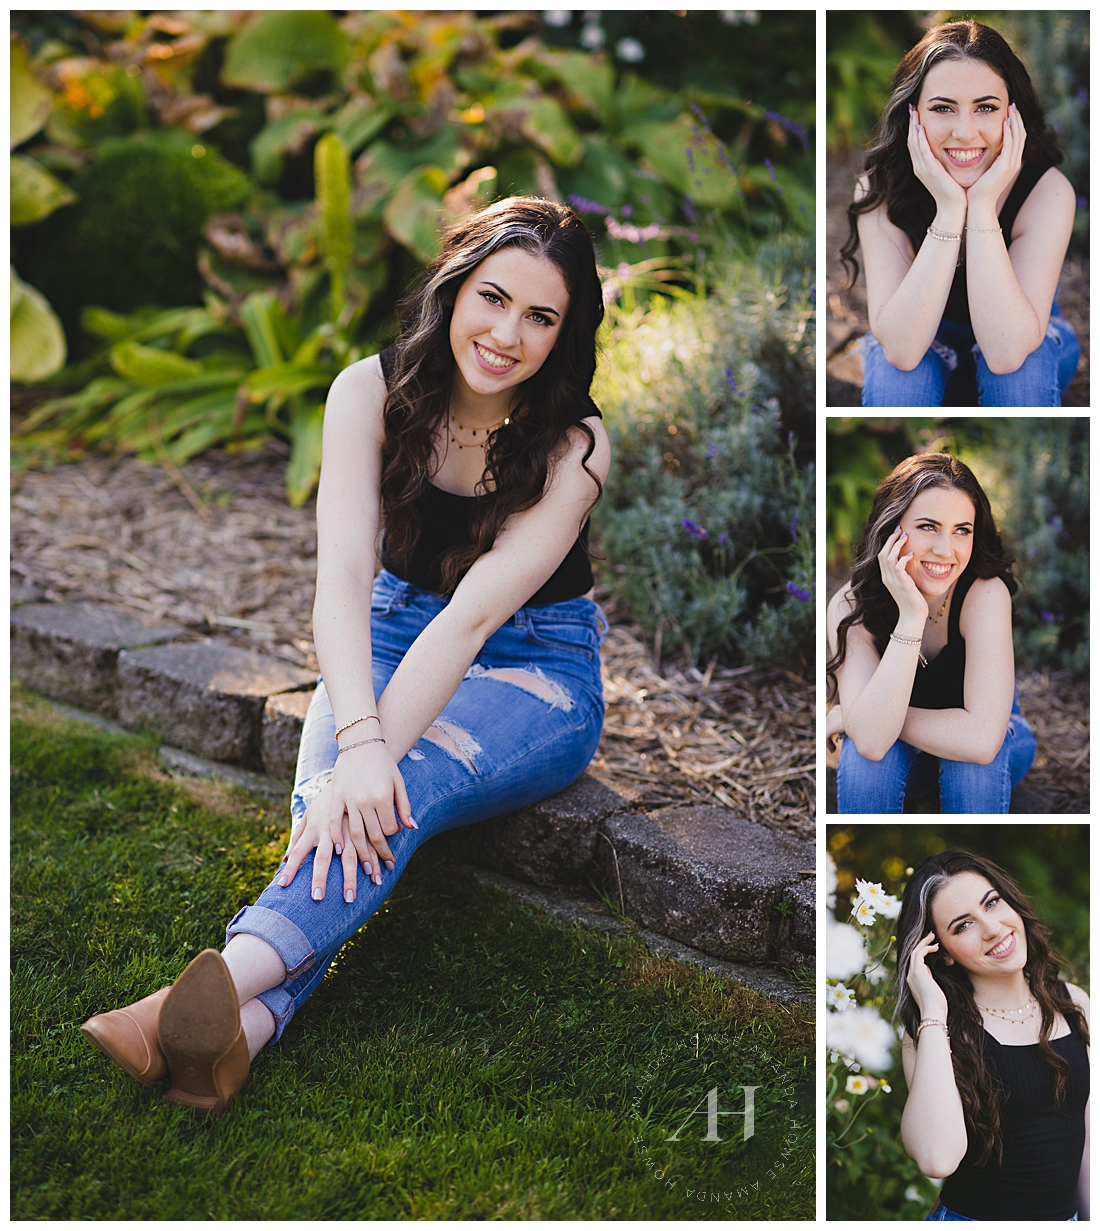 Point Defiance Rose Garden Senior Portraits | How to Style Ripped Jeans and a Tank Top for Senior Portraits | Photographed by the Best Tacoma Senior Portrait Photographer Amanda Howse